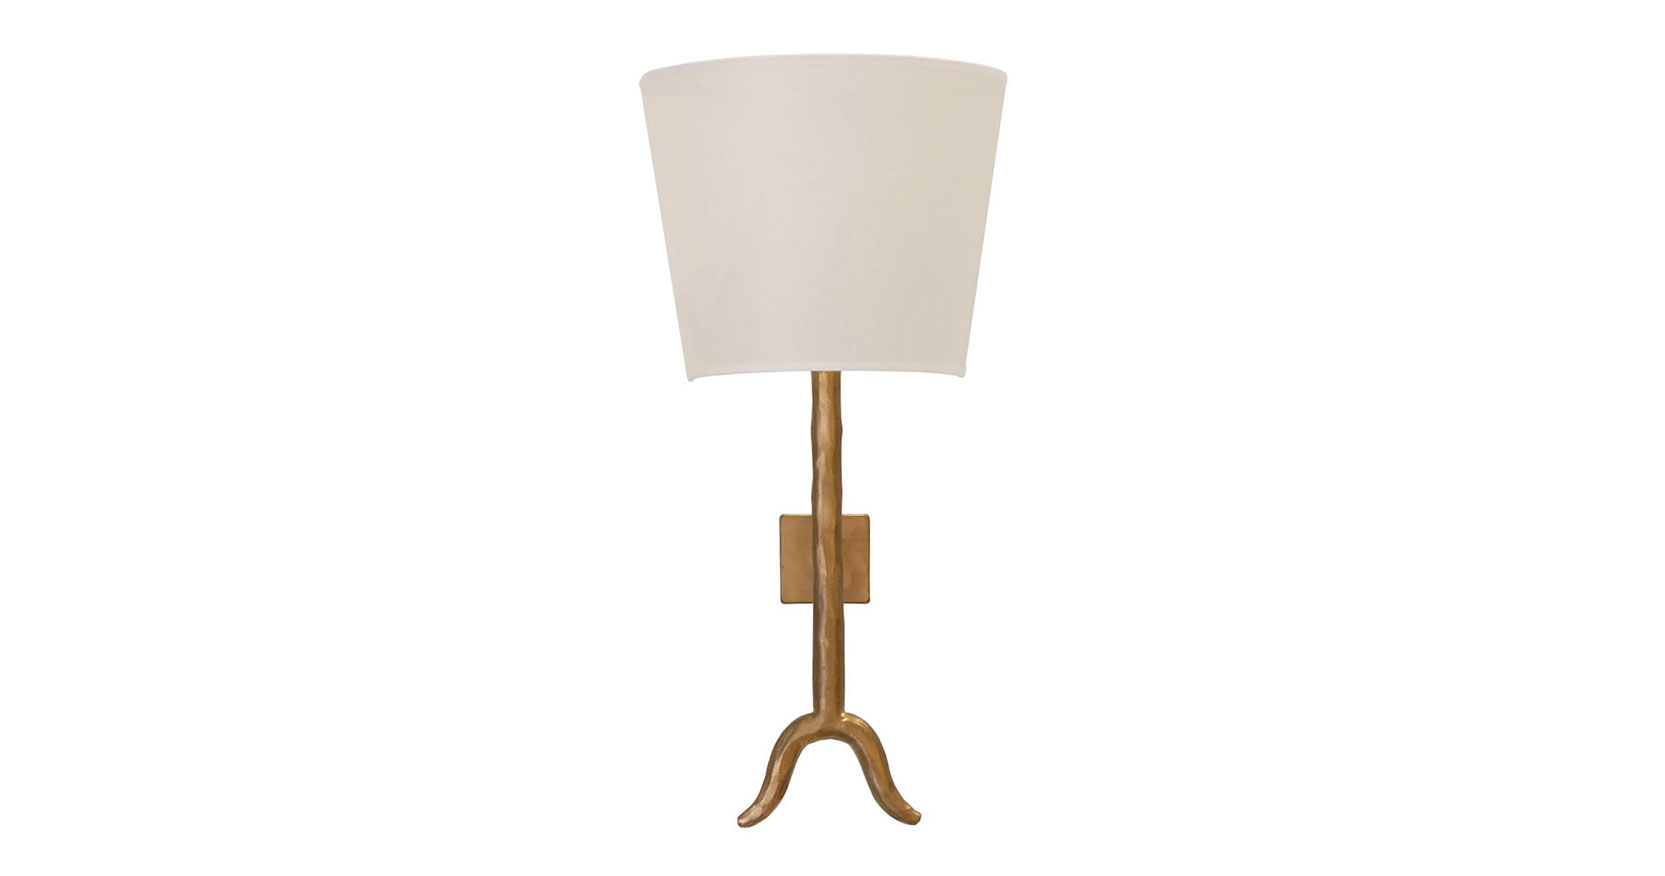 Garouste Bonetti, wall lamp with a white rounded screen, and a patinated gold wrought iron rod which divides at the bottom into an elegant fork